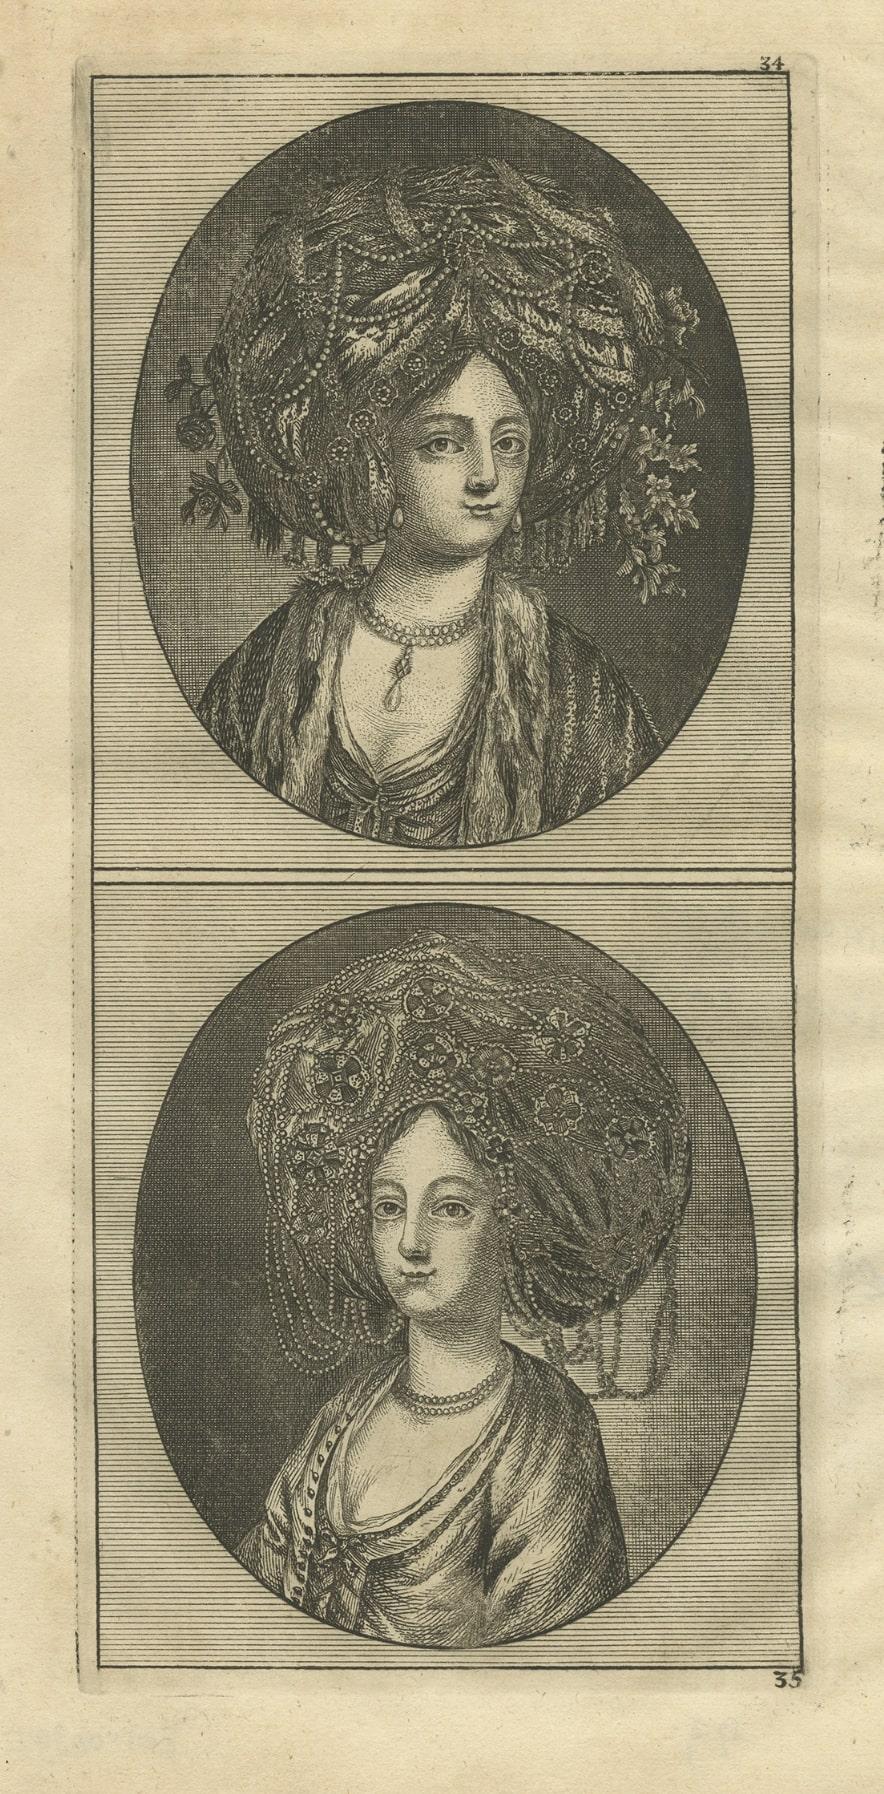 Paper Antique Print of Women from Constantinople 'Istanbul', Turkey, 1698